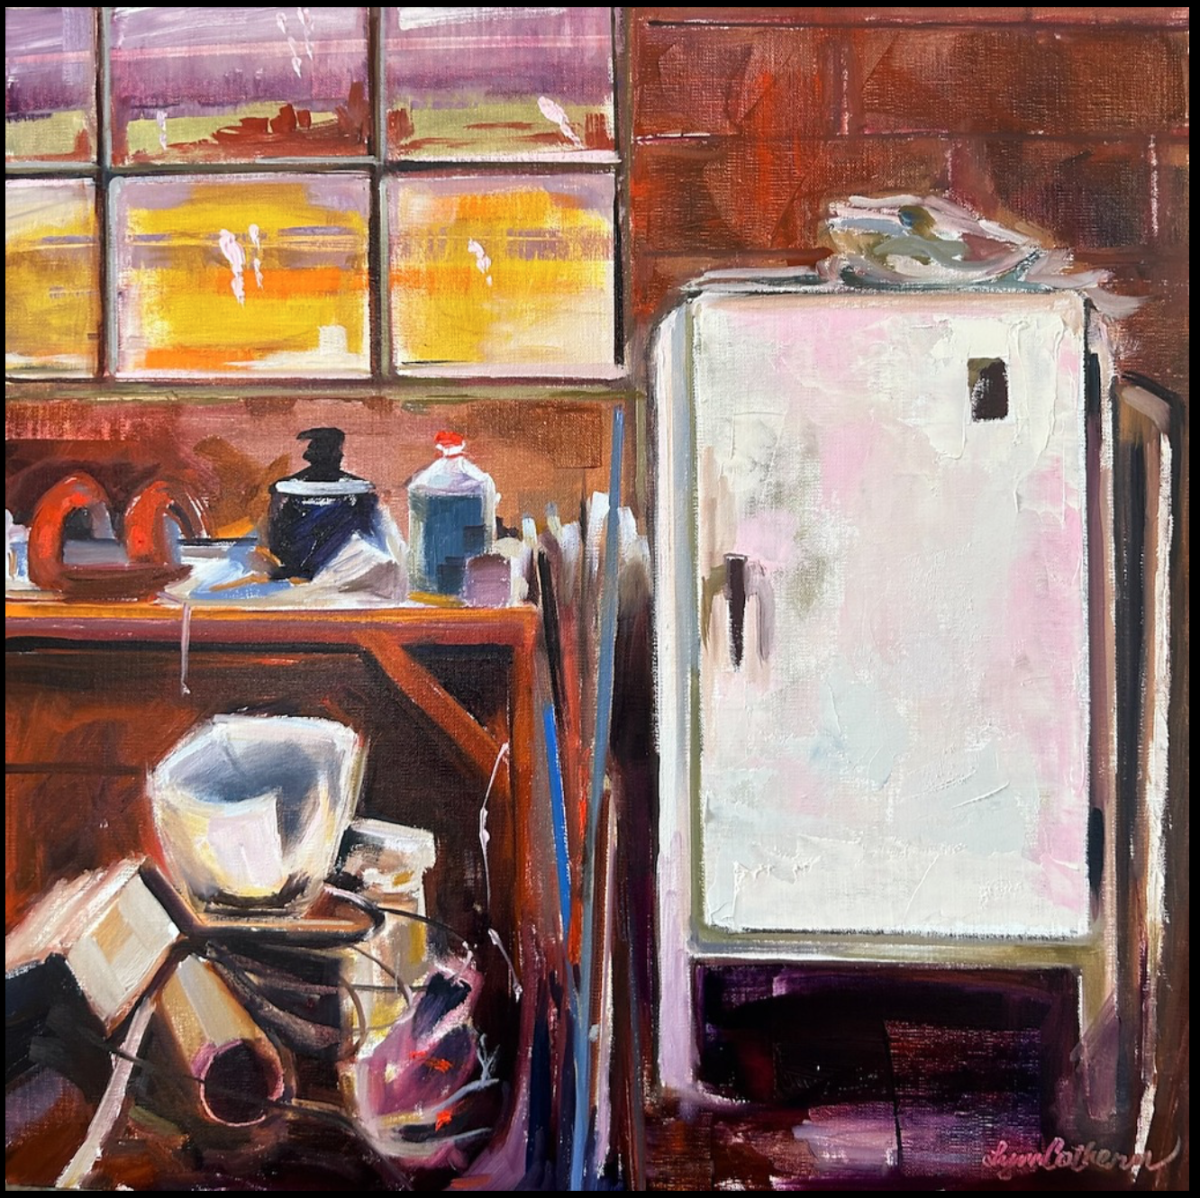 painting of an old refrigerator in a workshop with a window